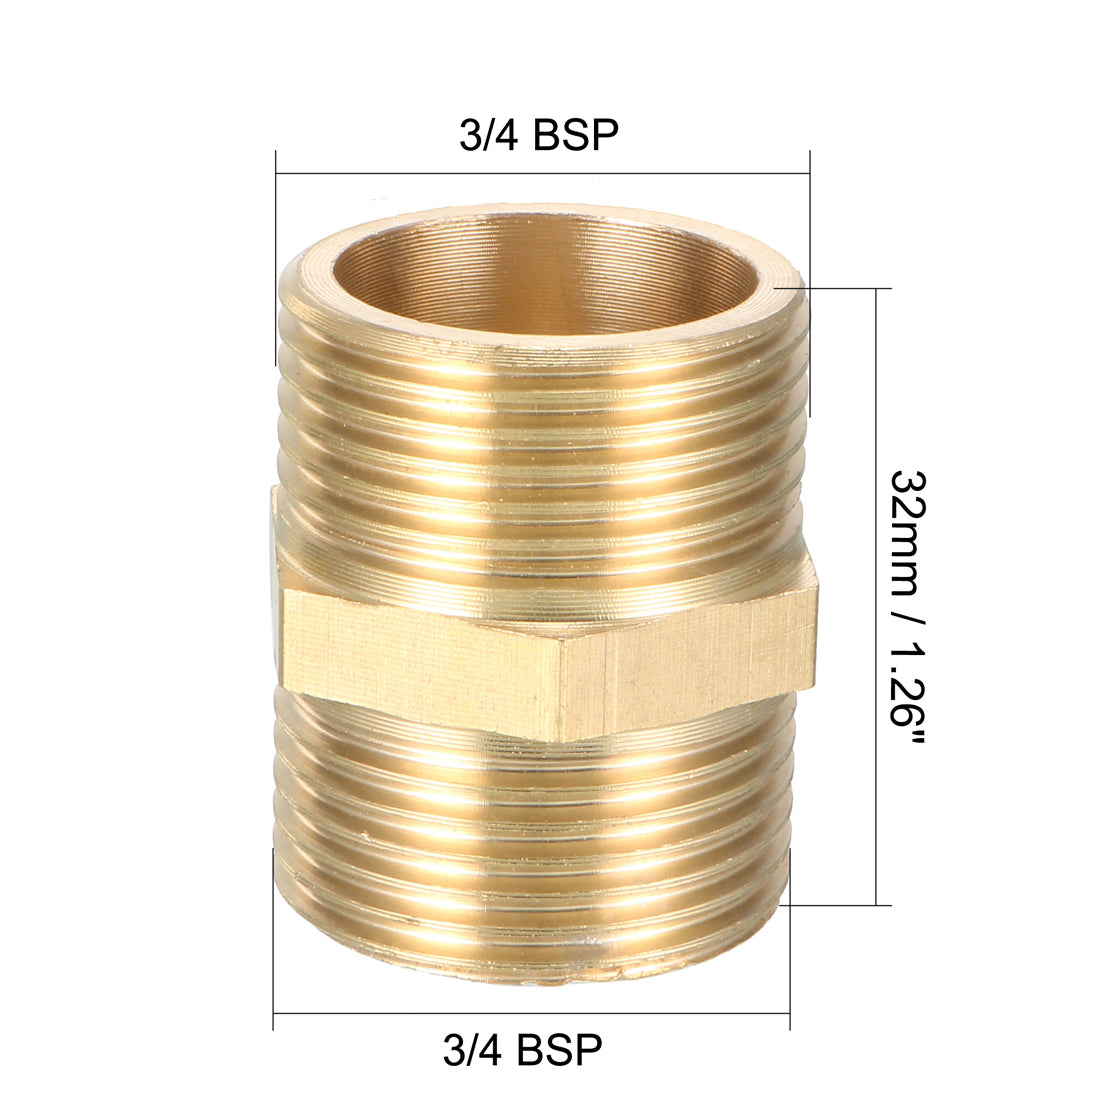 uxcell Uxcell Brass Pipe Fitting Hex Bushing 3/4 BSP Male x 3/4 BSP Male Thread Connectors